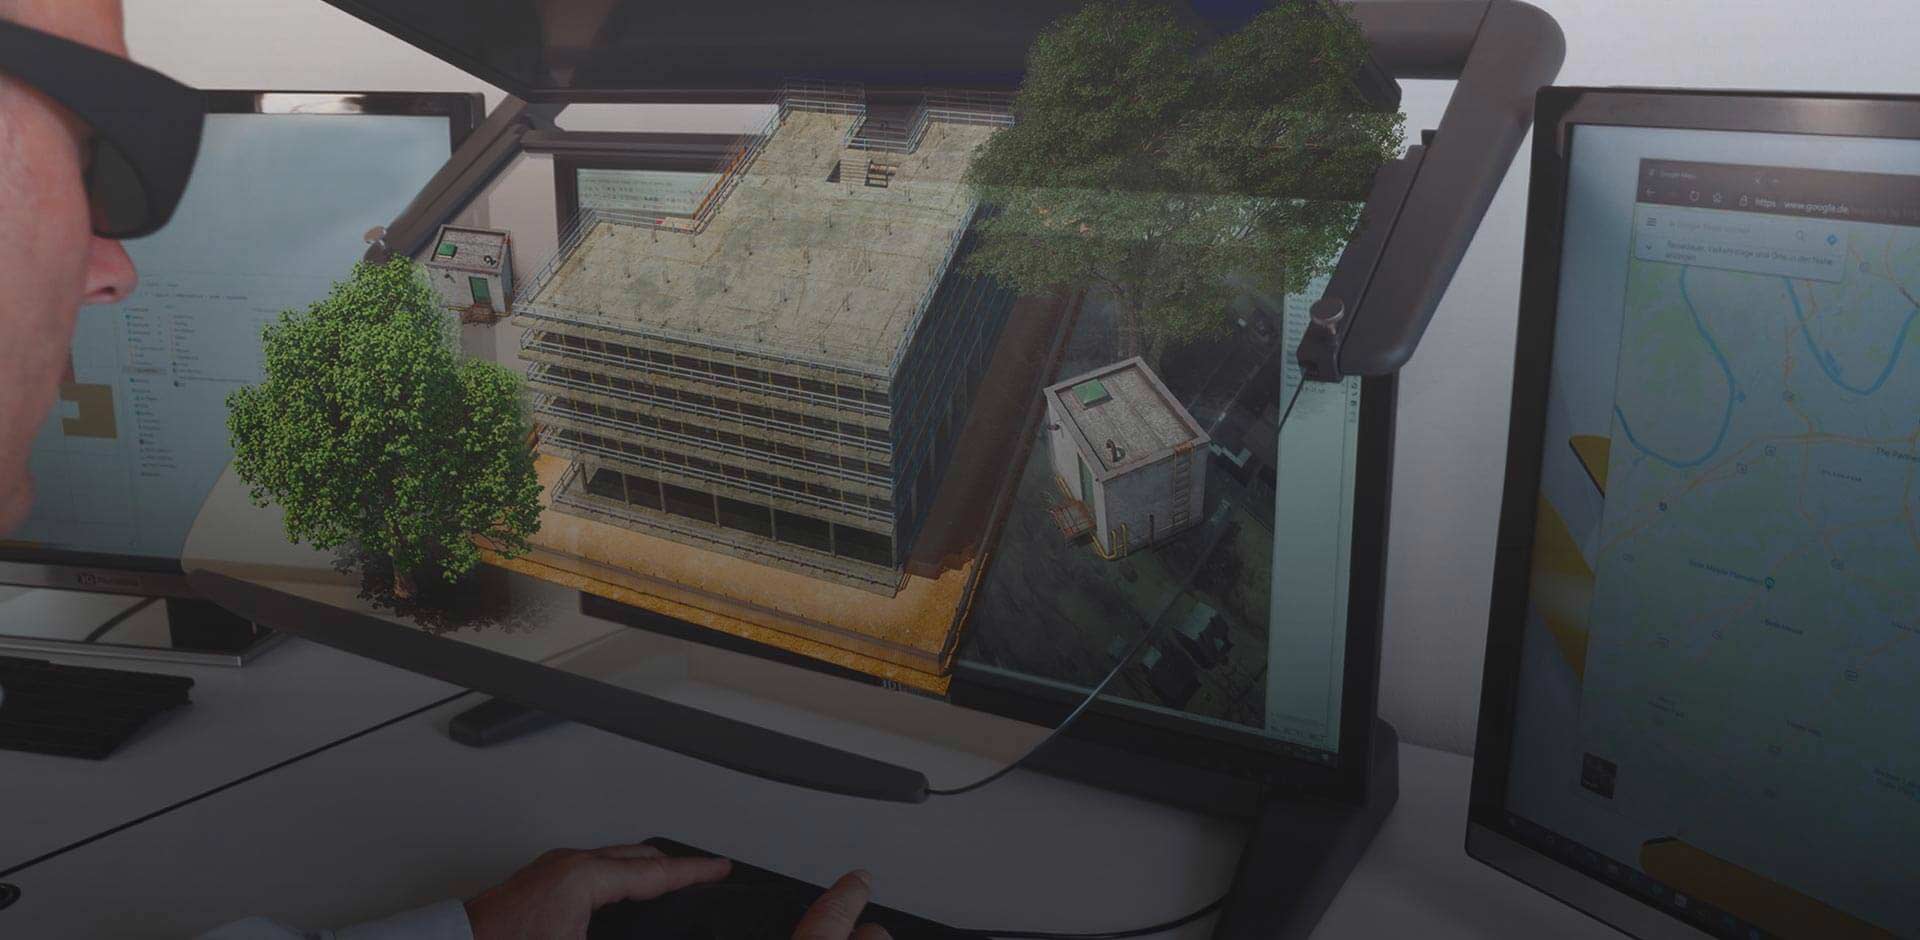 Competitor product intelligence for a BIM-enabled 3D viewer enables real-estate firm develop a new product with enhanced features Banner